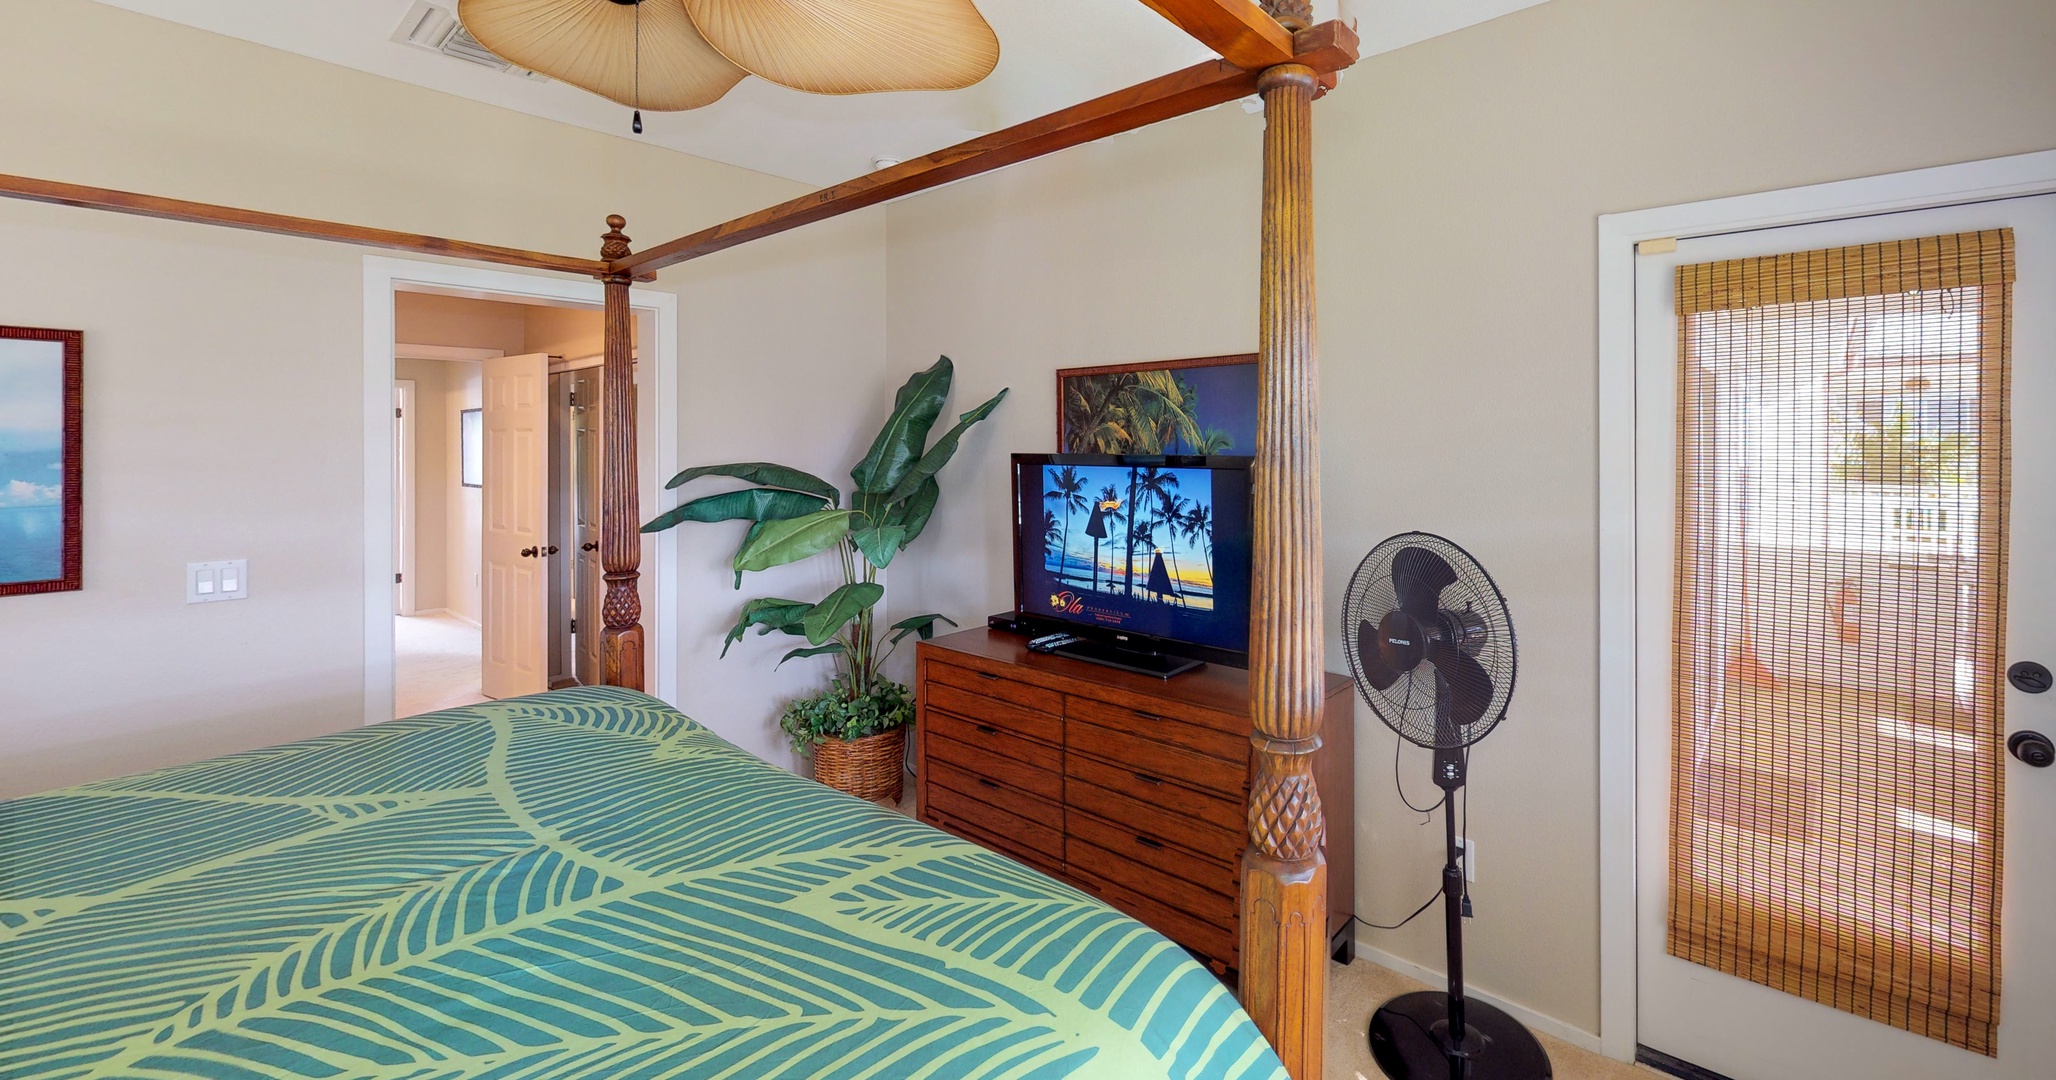 Kapolei Vacation Rentals, Coconut Plantation 1194-3 - The primary guest bedroom also features a dresser and Polynesian style  furnishings.